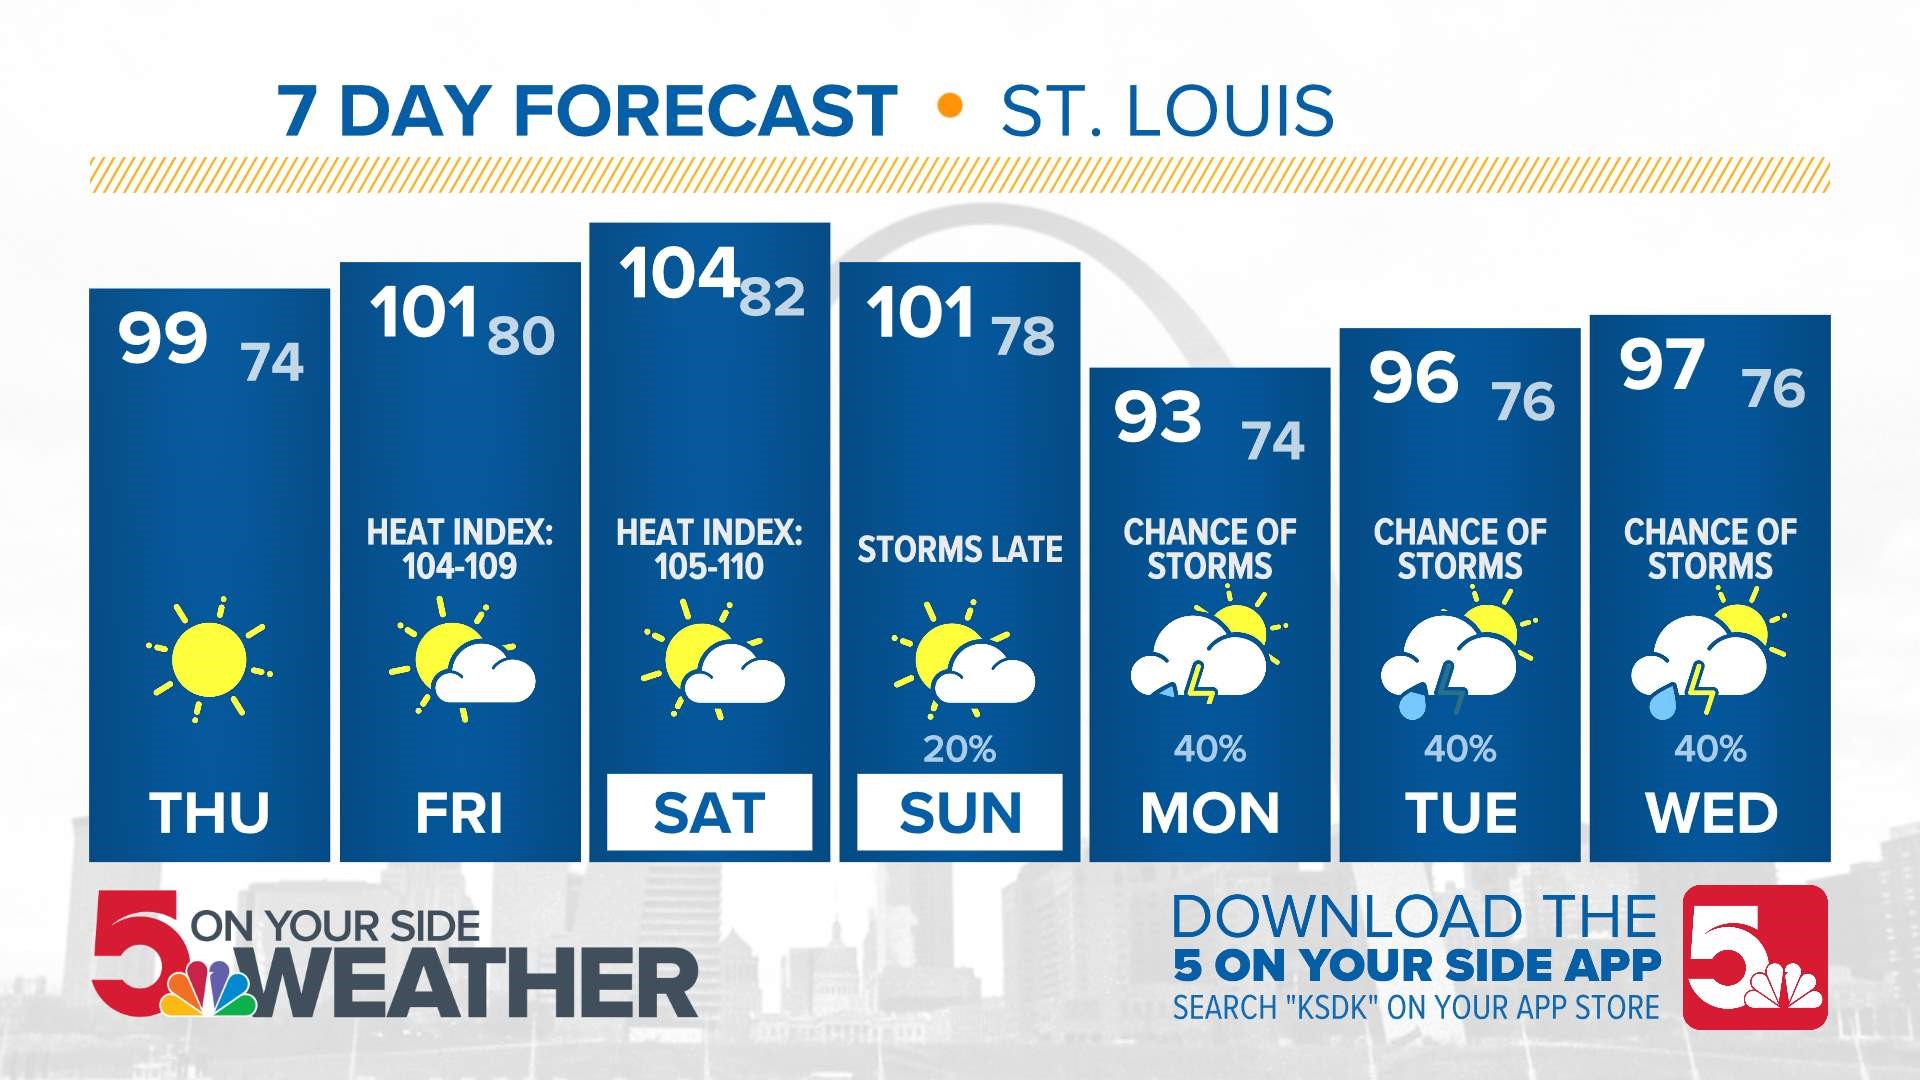 There could be rain in the future for St. Louis. It will be hot until then.